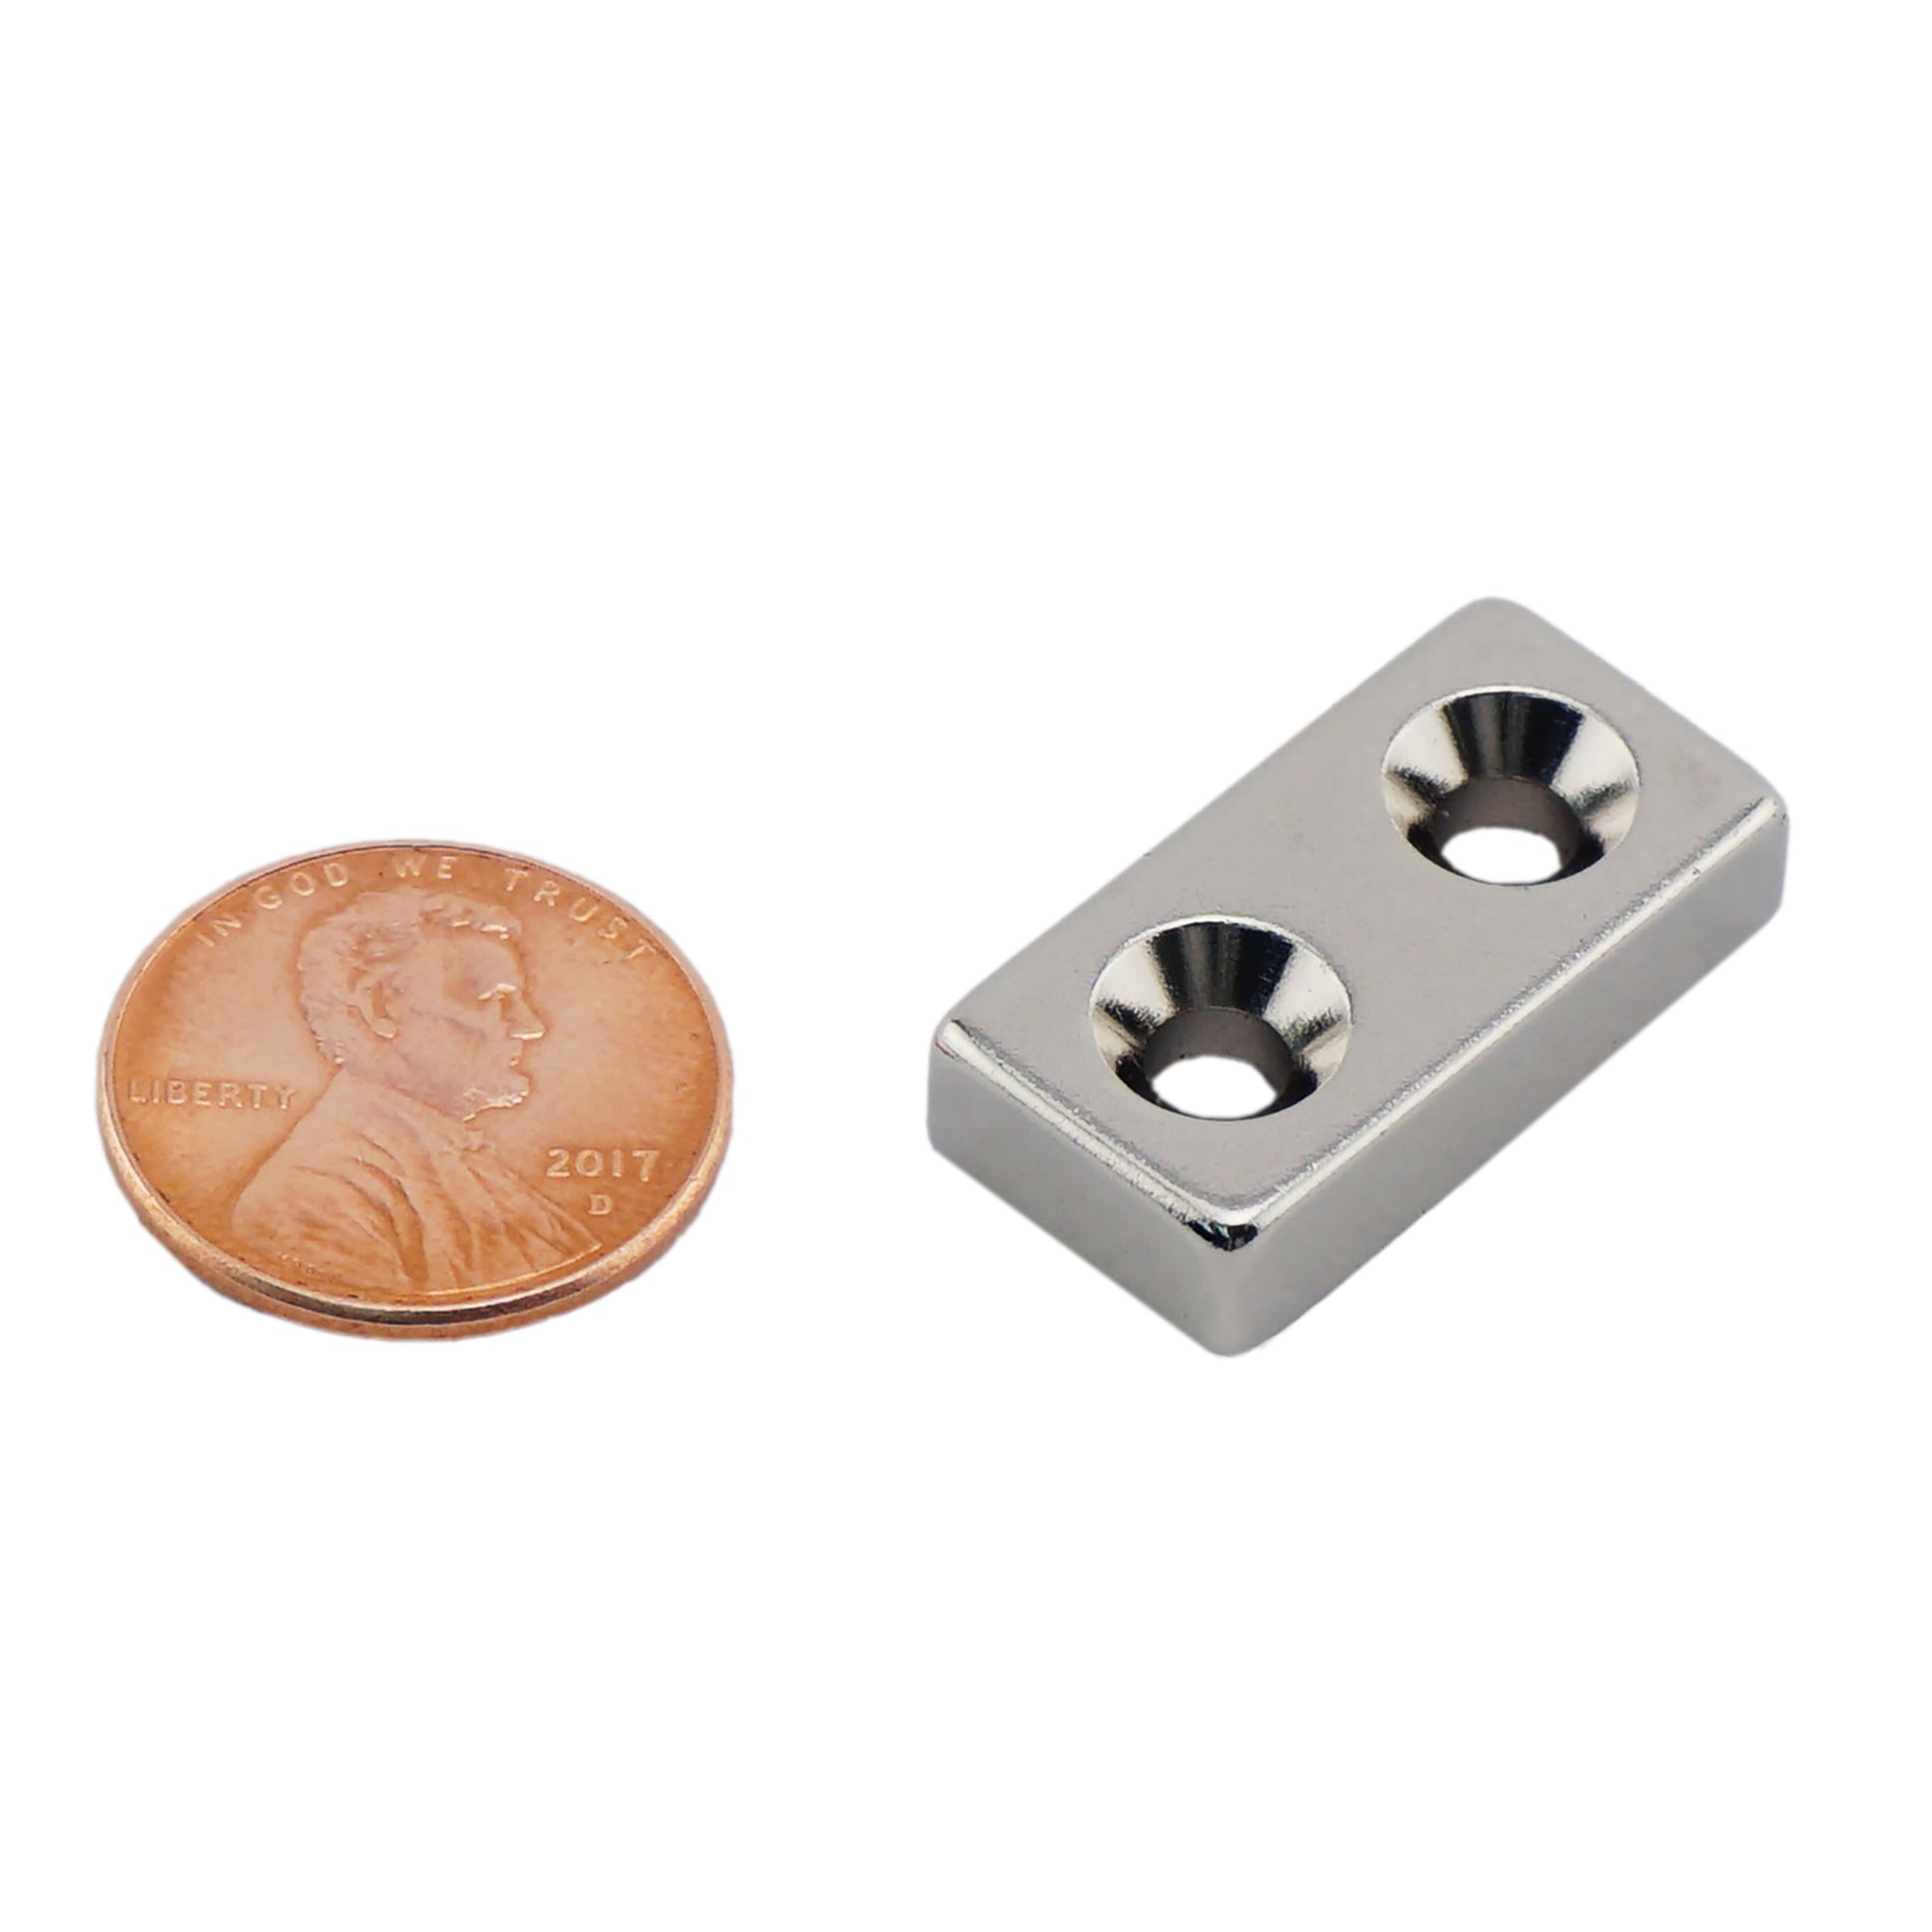 Load image into Gallery viewer, NB002556NCTSX2 Neodymium Countersunk Block Magnet - Compared to Penny for Size Reference